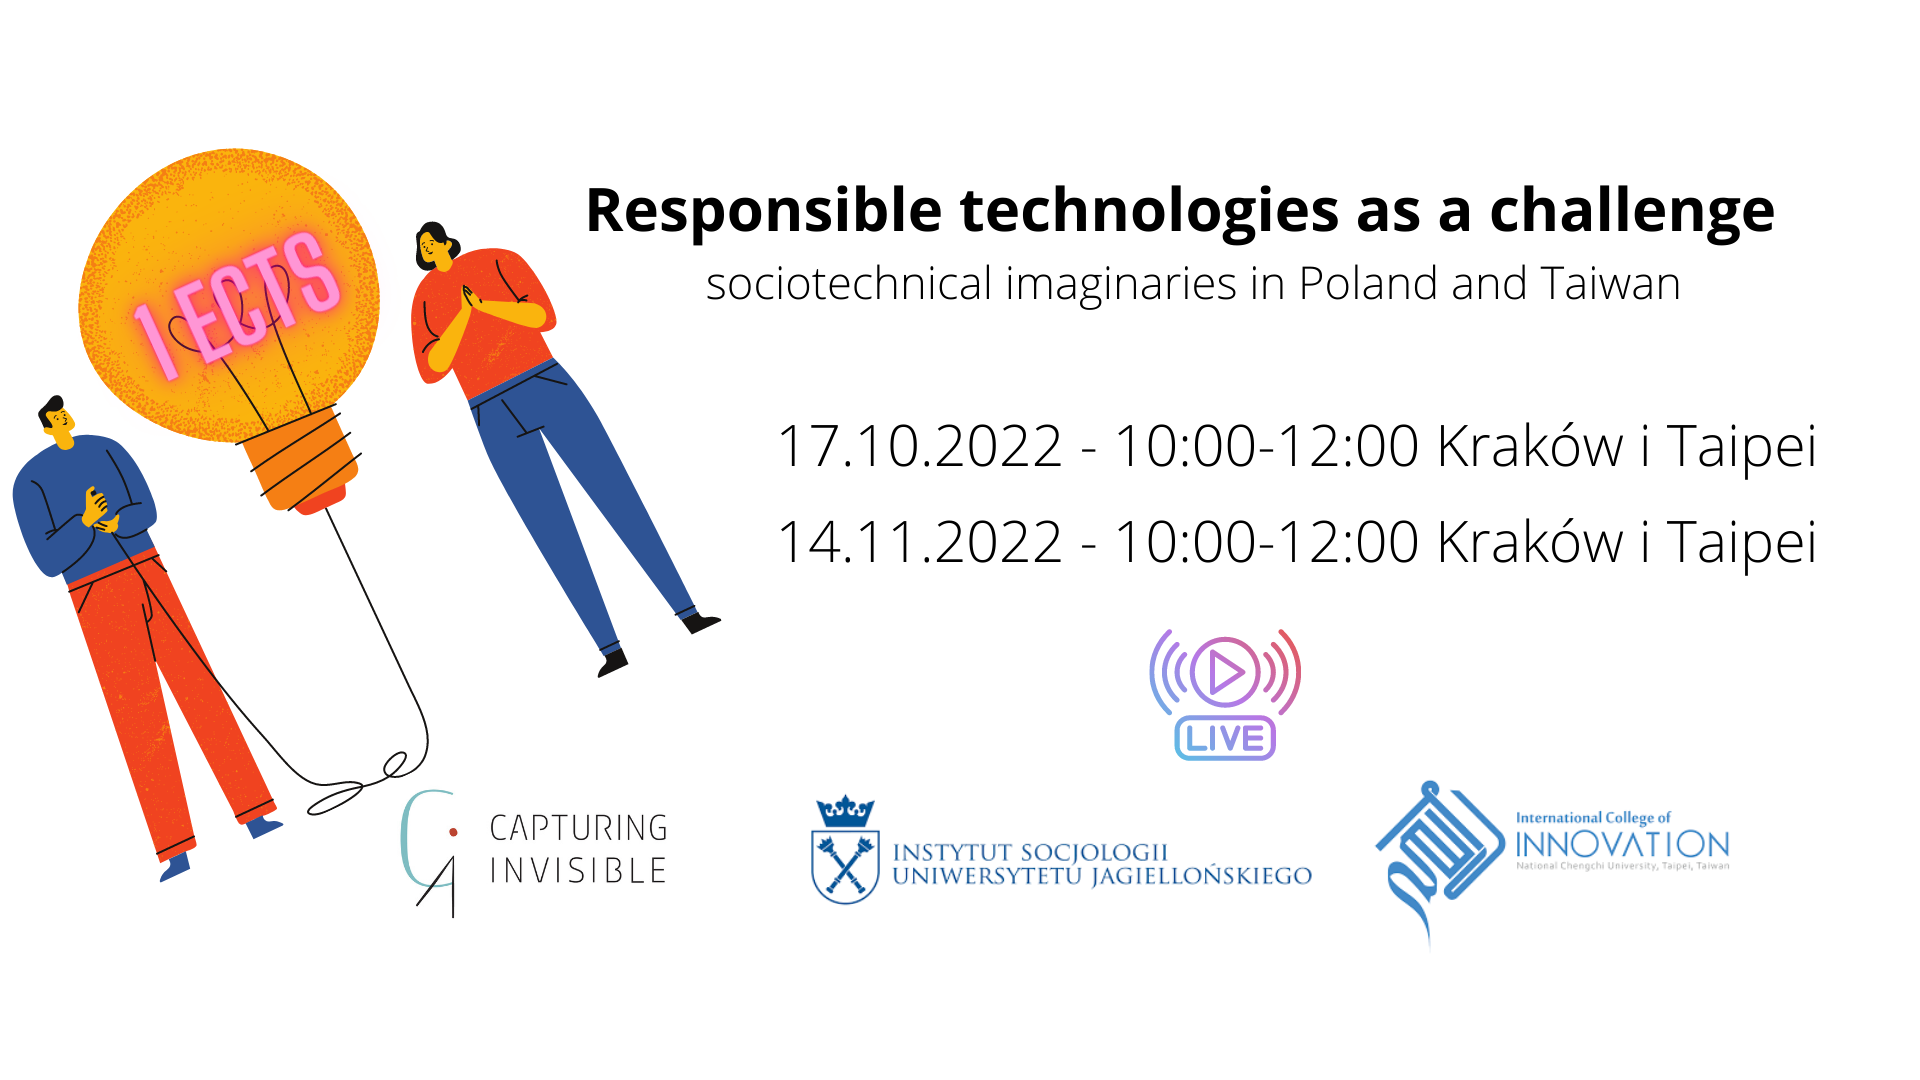 We are launching a first #joint real time lecture in Krakow and Taiwan!